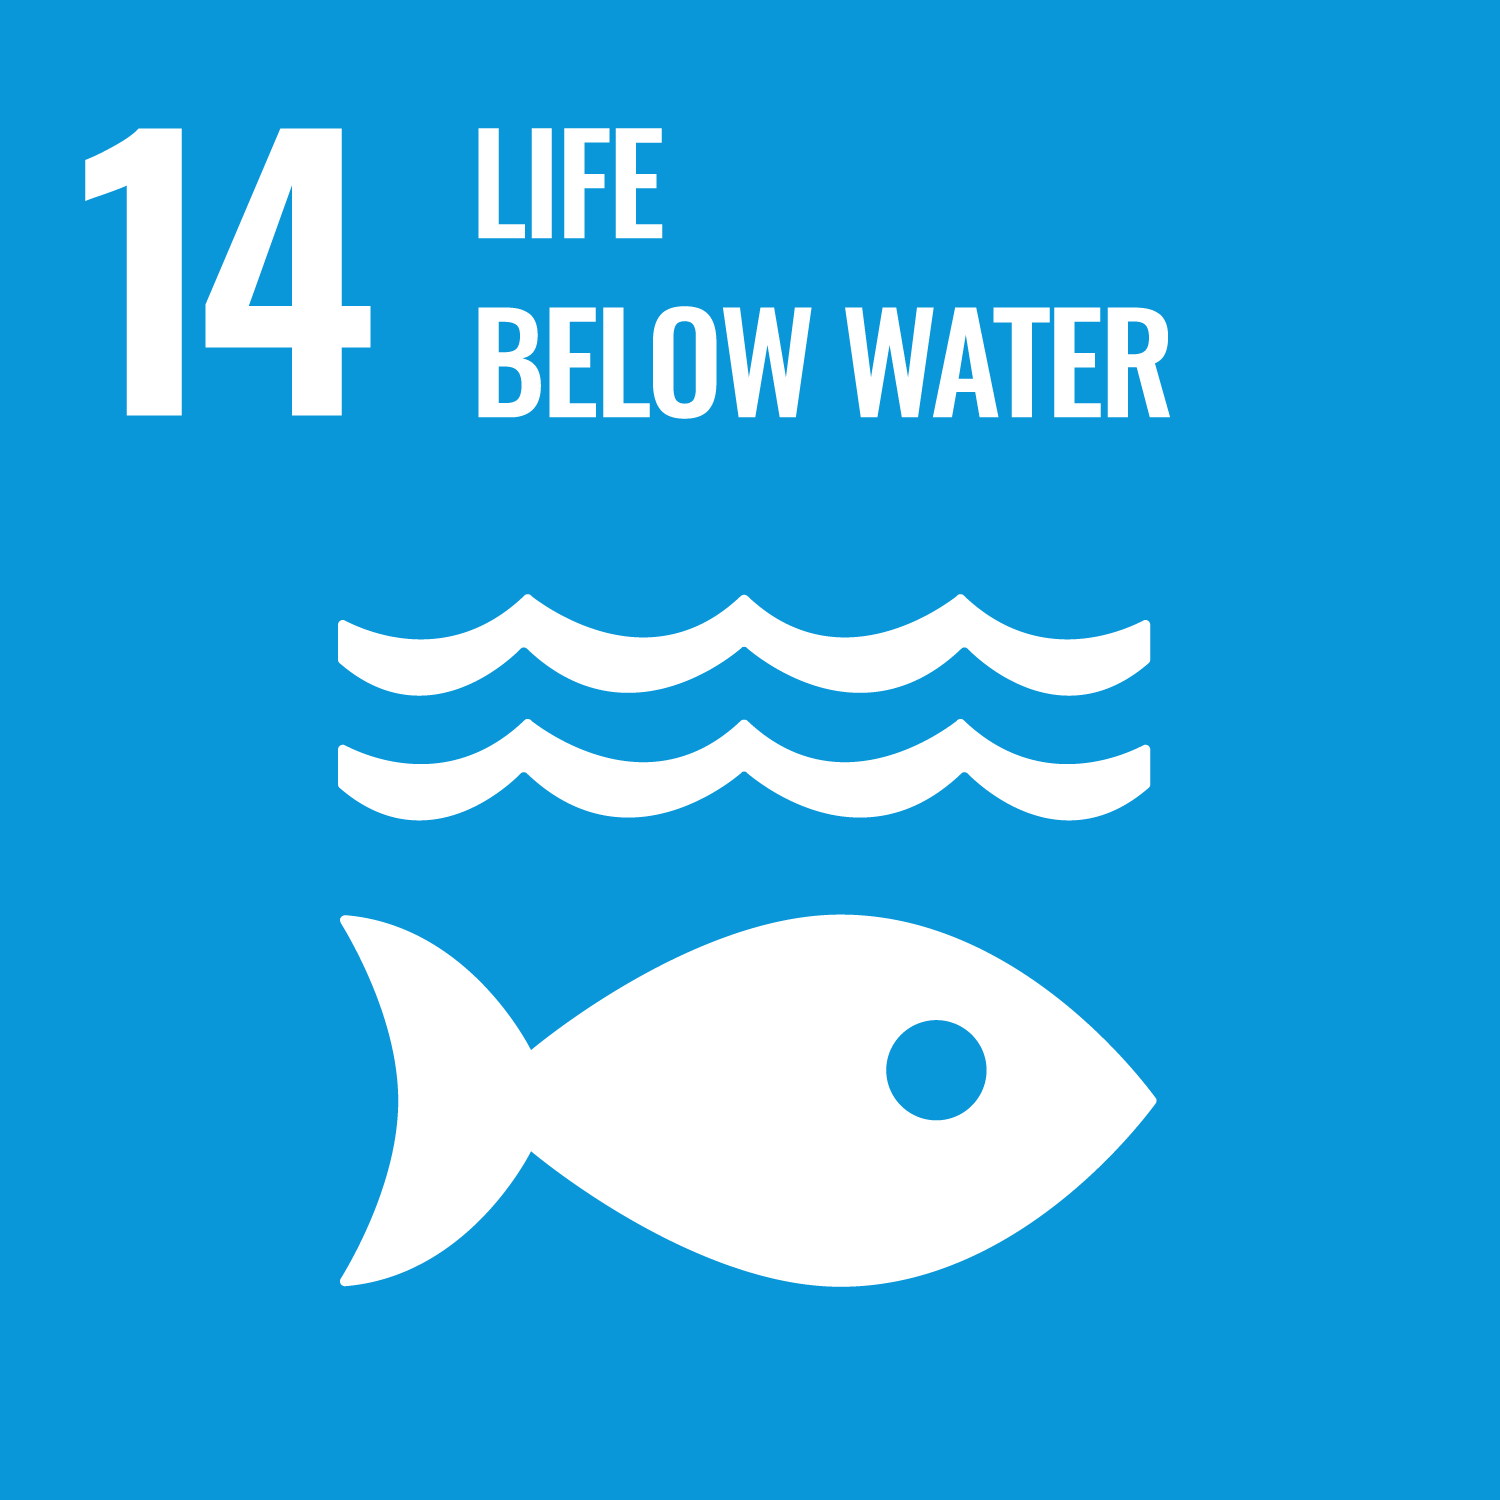 UN Compact Goal 14 Icon "Life Below Water"